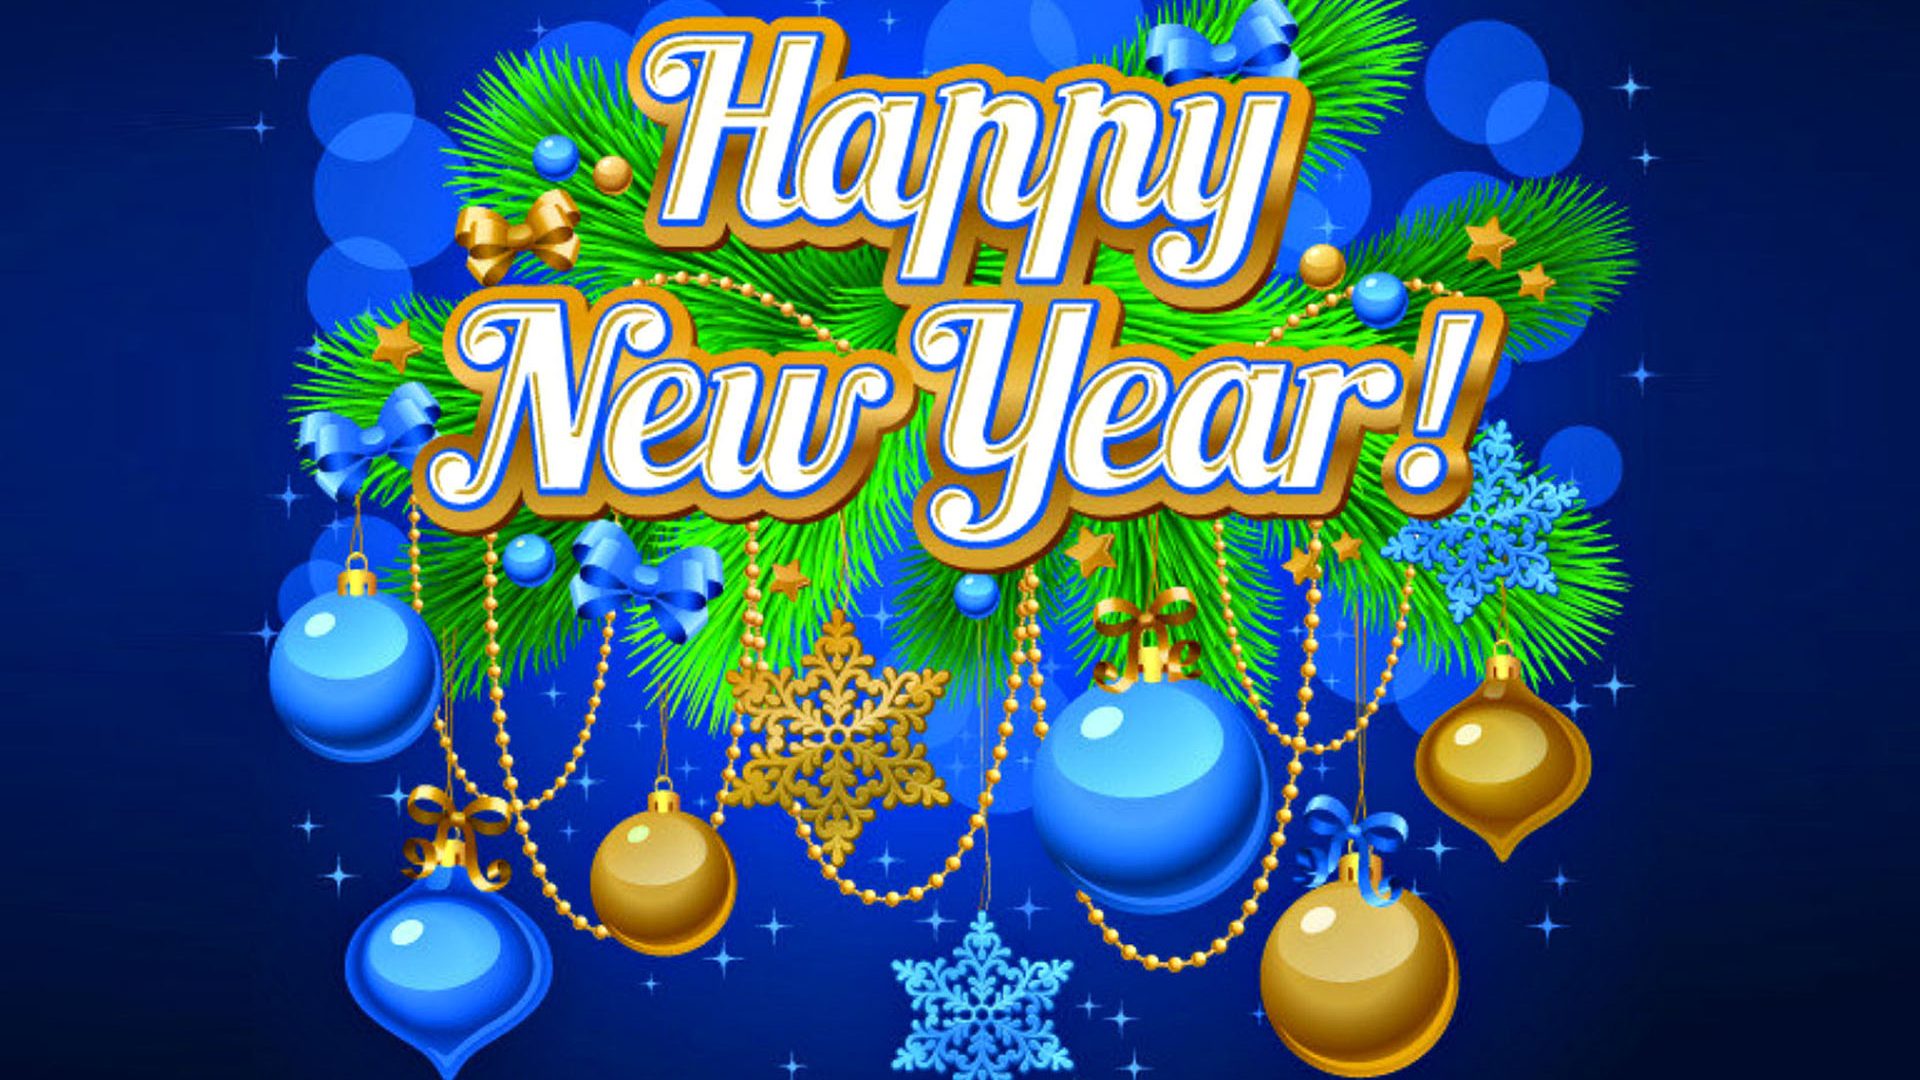 Happy New Year Images Hd | Festivals